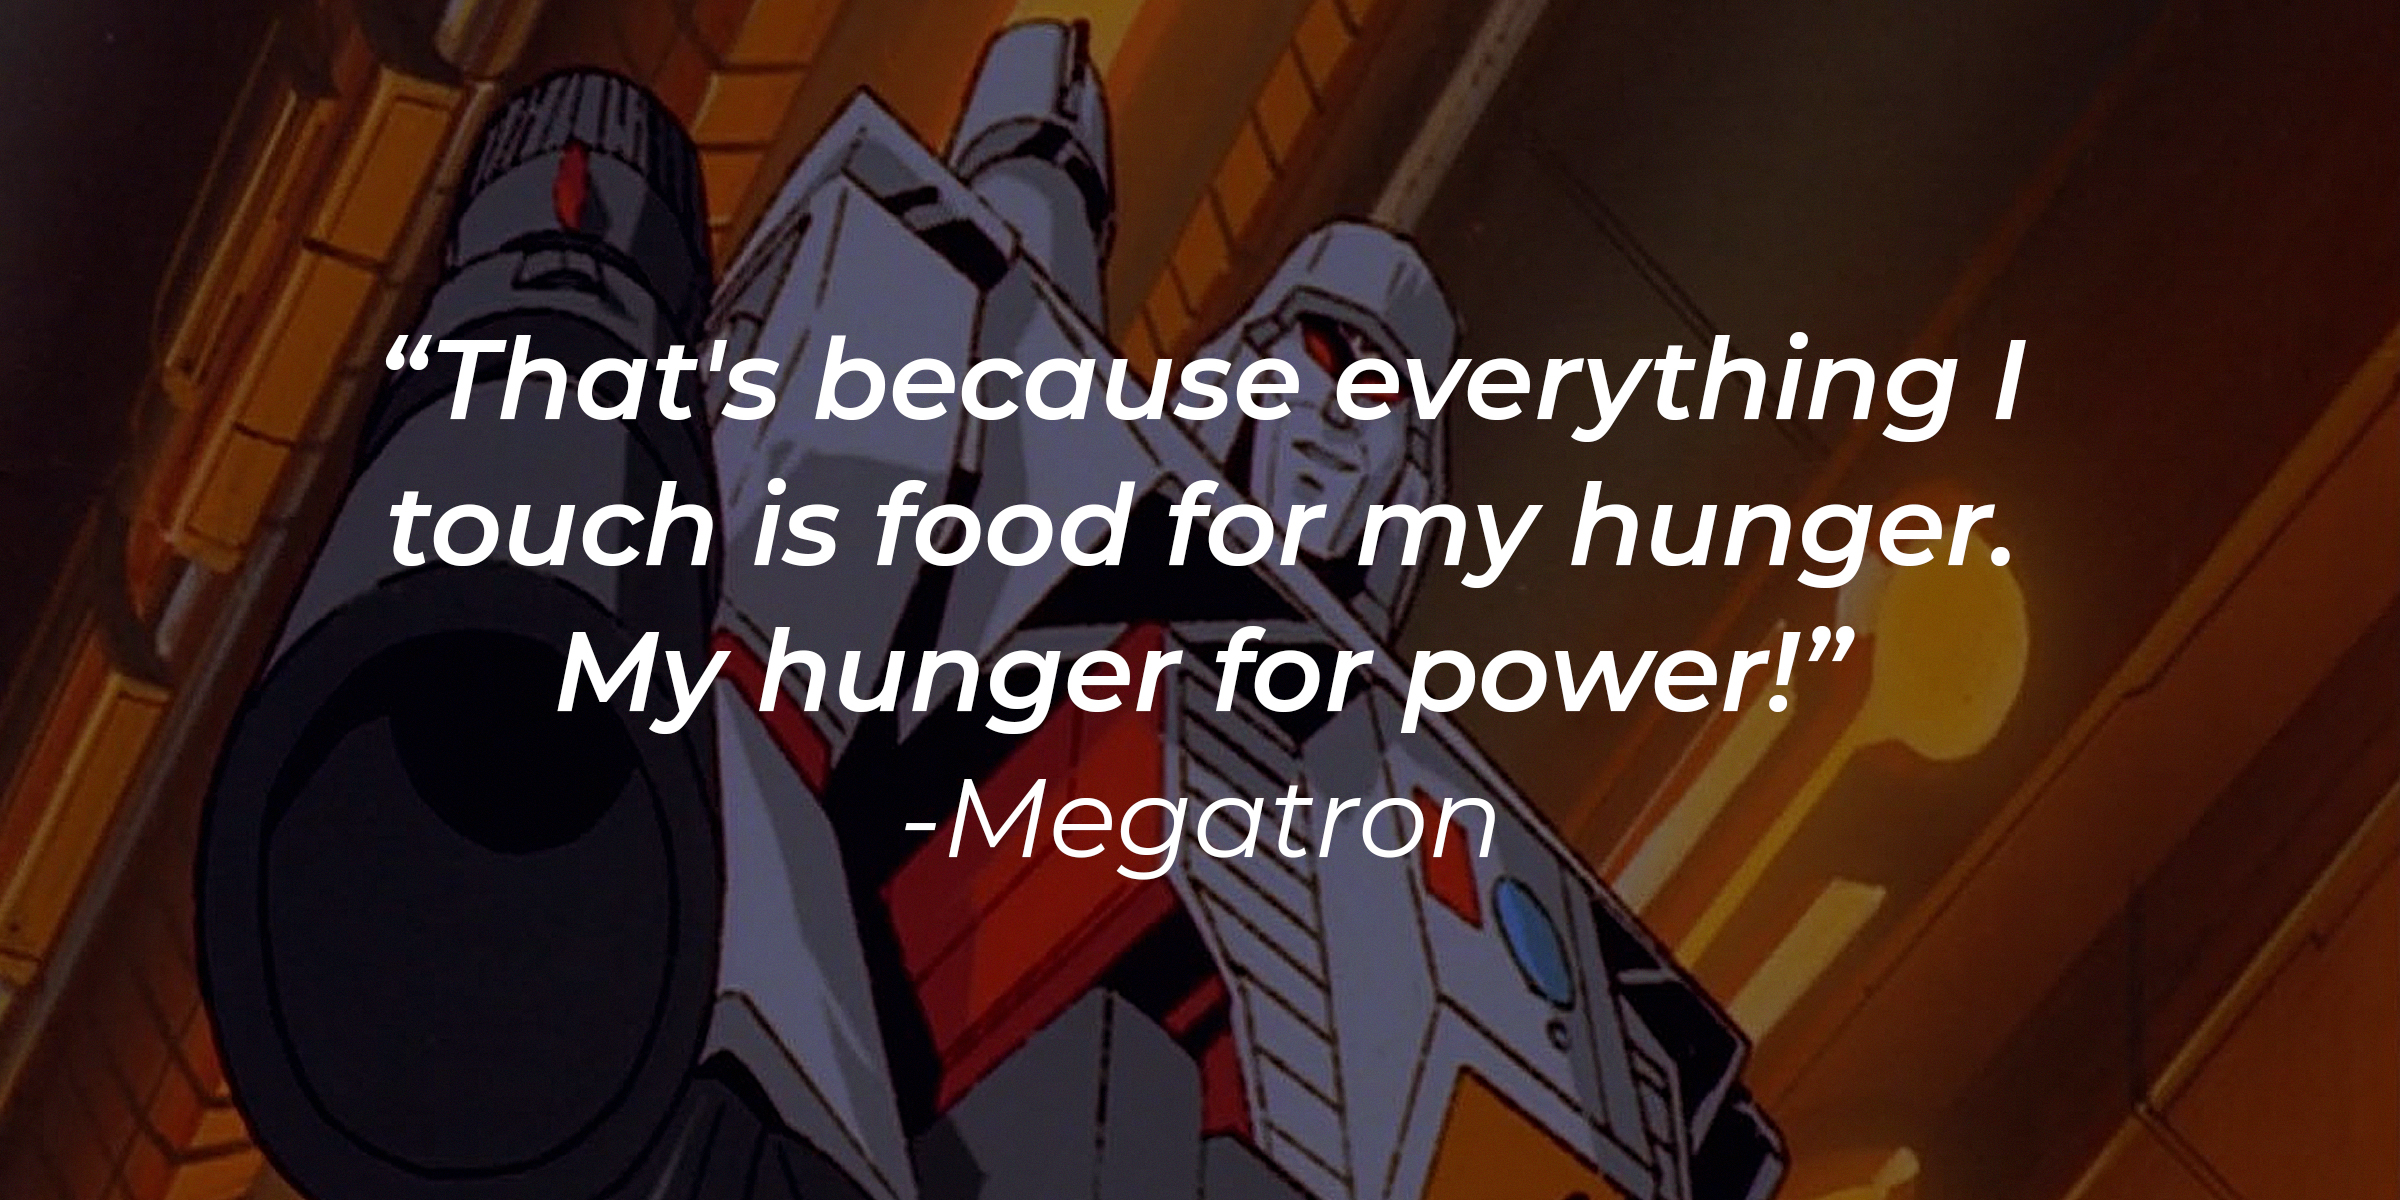 Megatron with His Quote, "That's Because Everything I Touch Is Food for My Hunger. My Hunger for Power!" | Source: Facebook/transformers